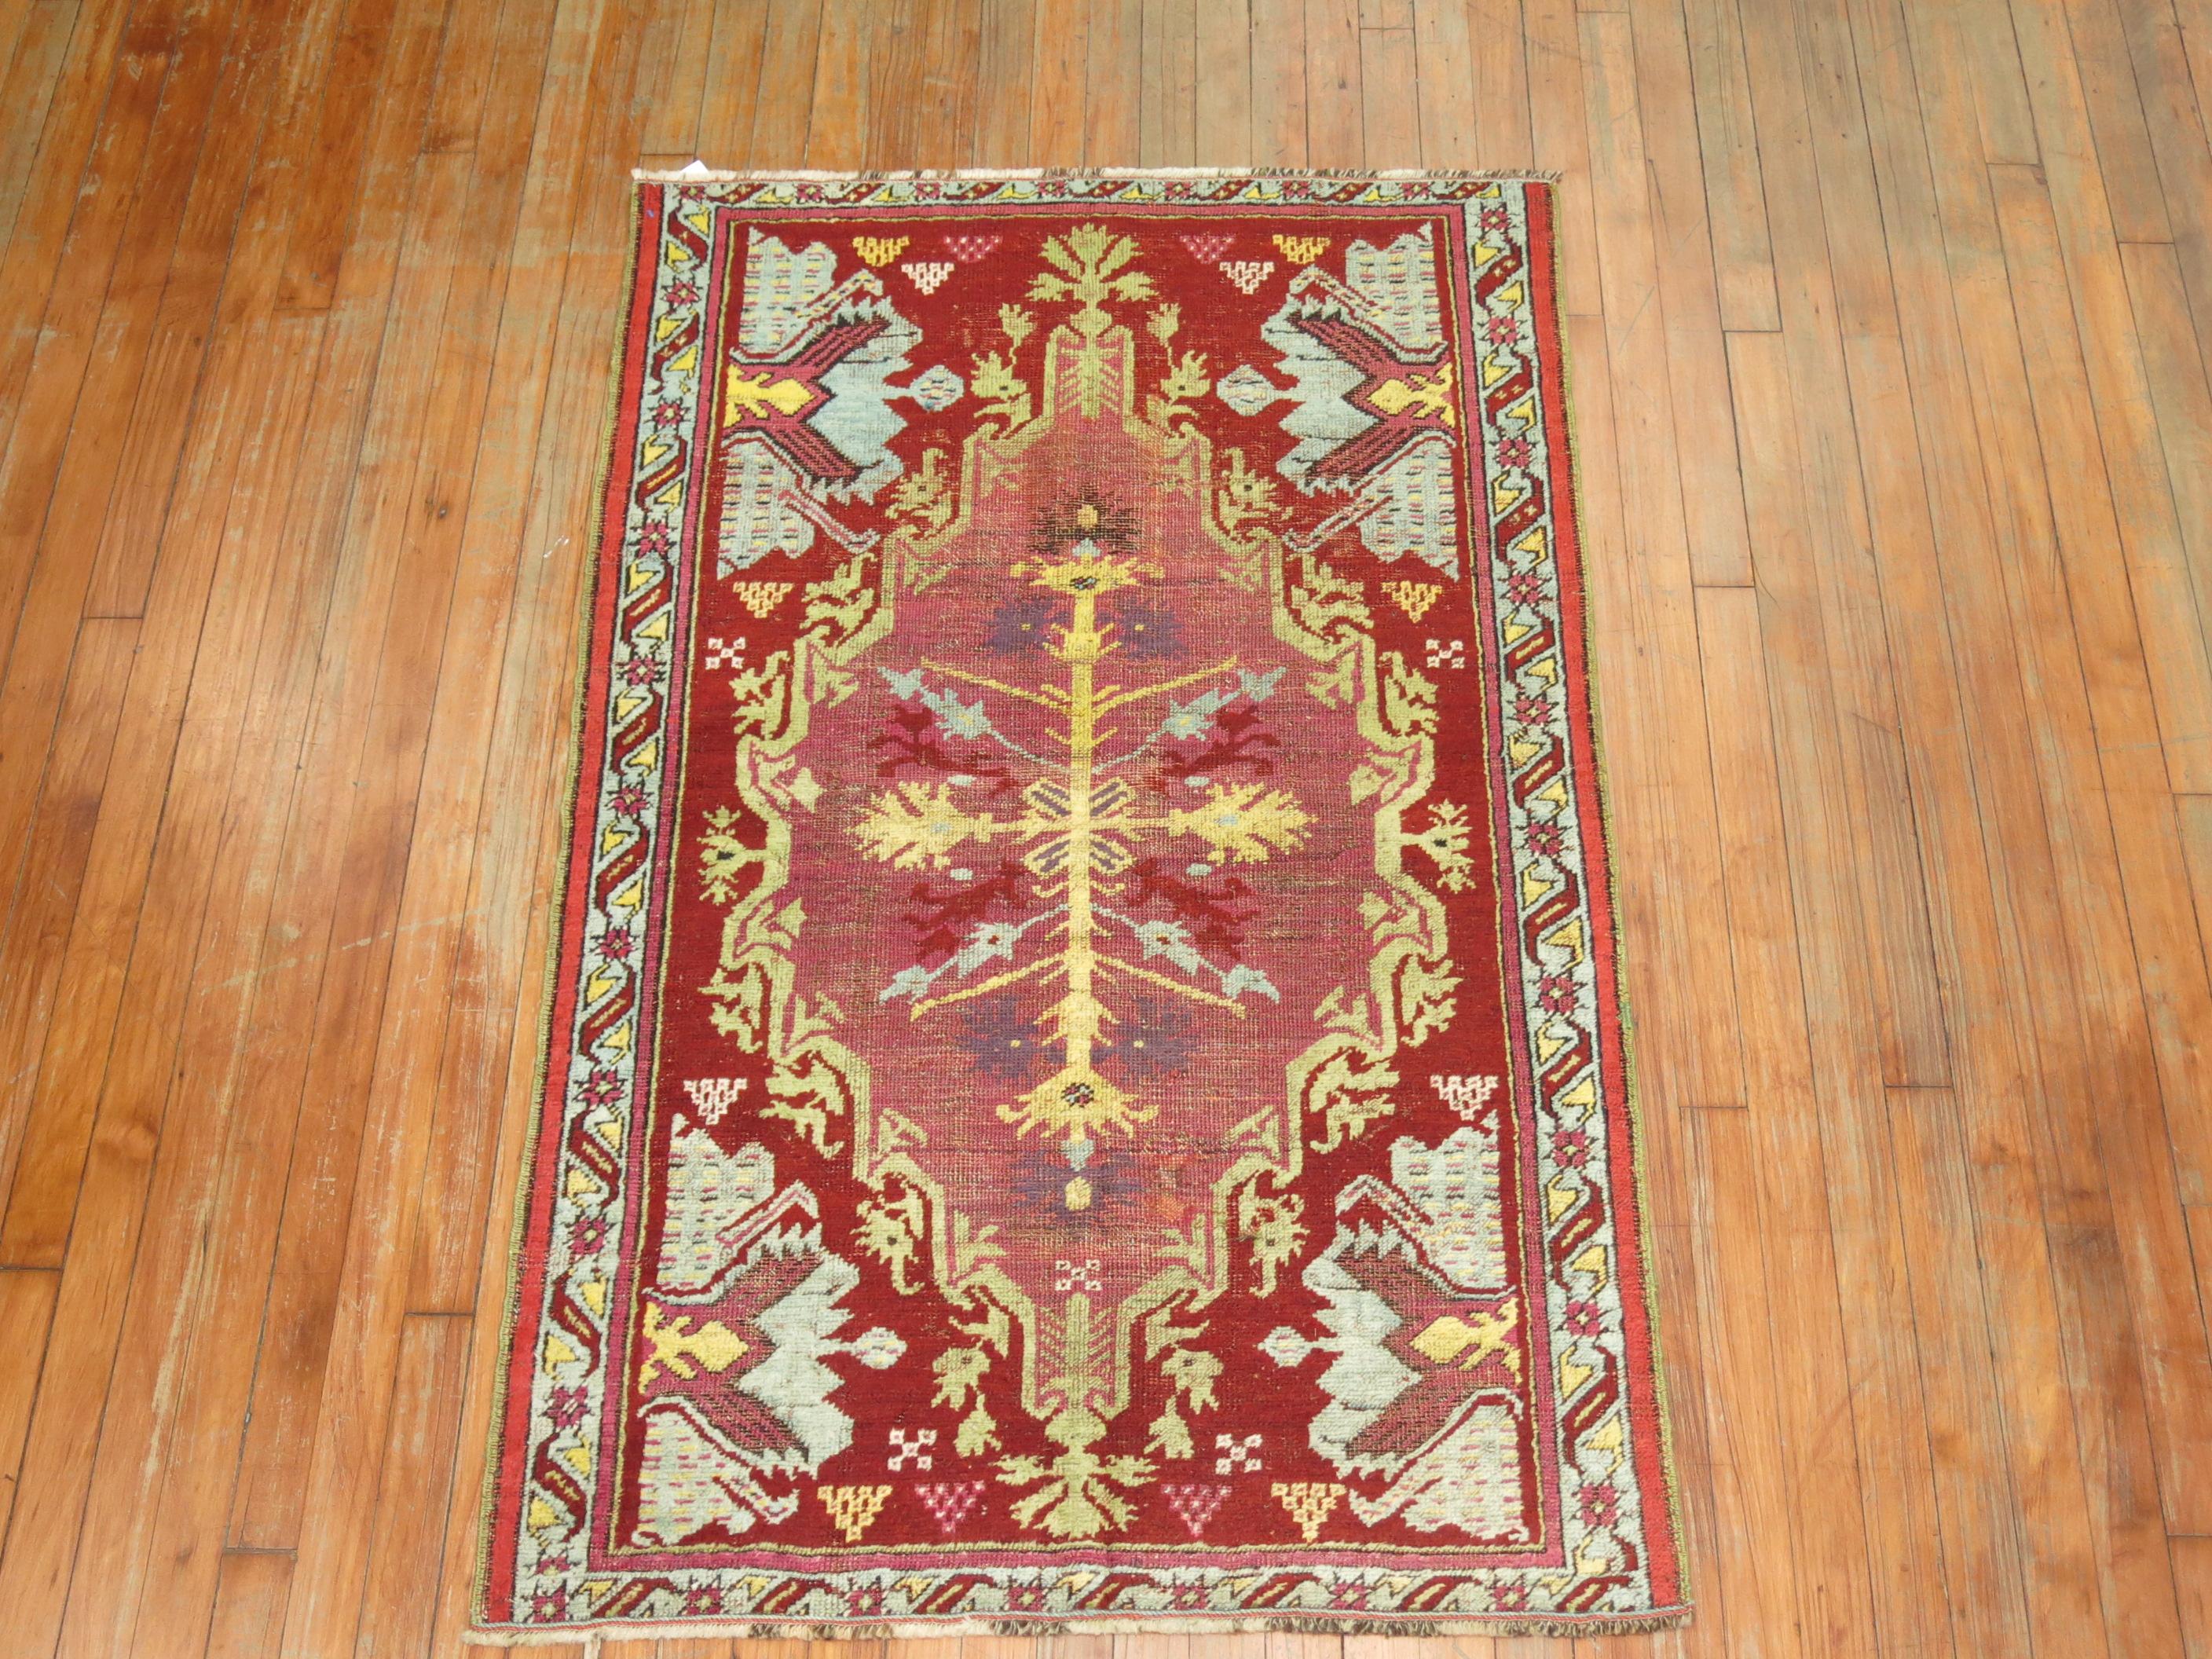 A one of a kind antique Turkish Ghiordes Scatter Size rug from the late 19th Century

Measures: 3'1'' x 5'.